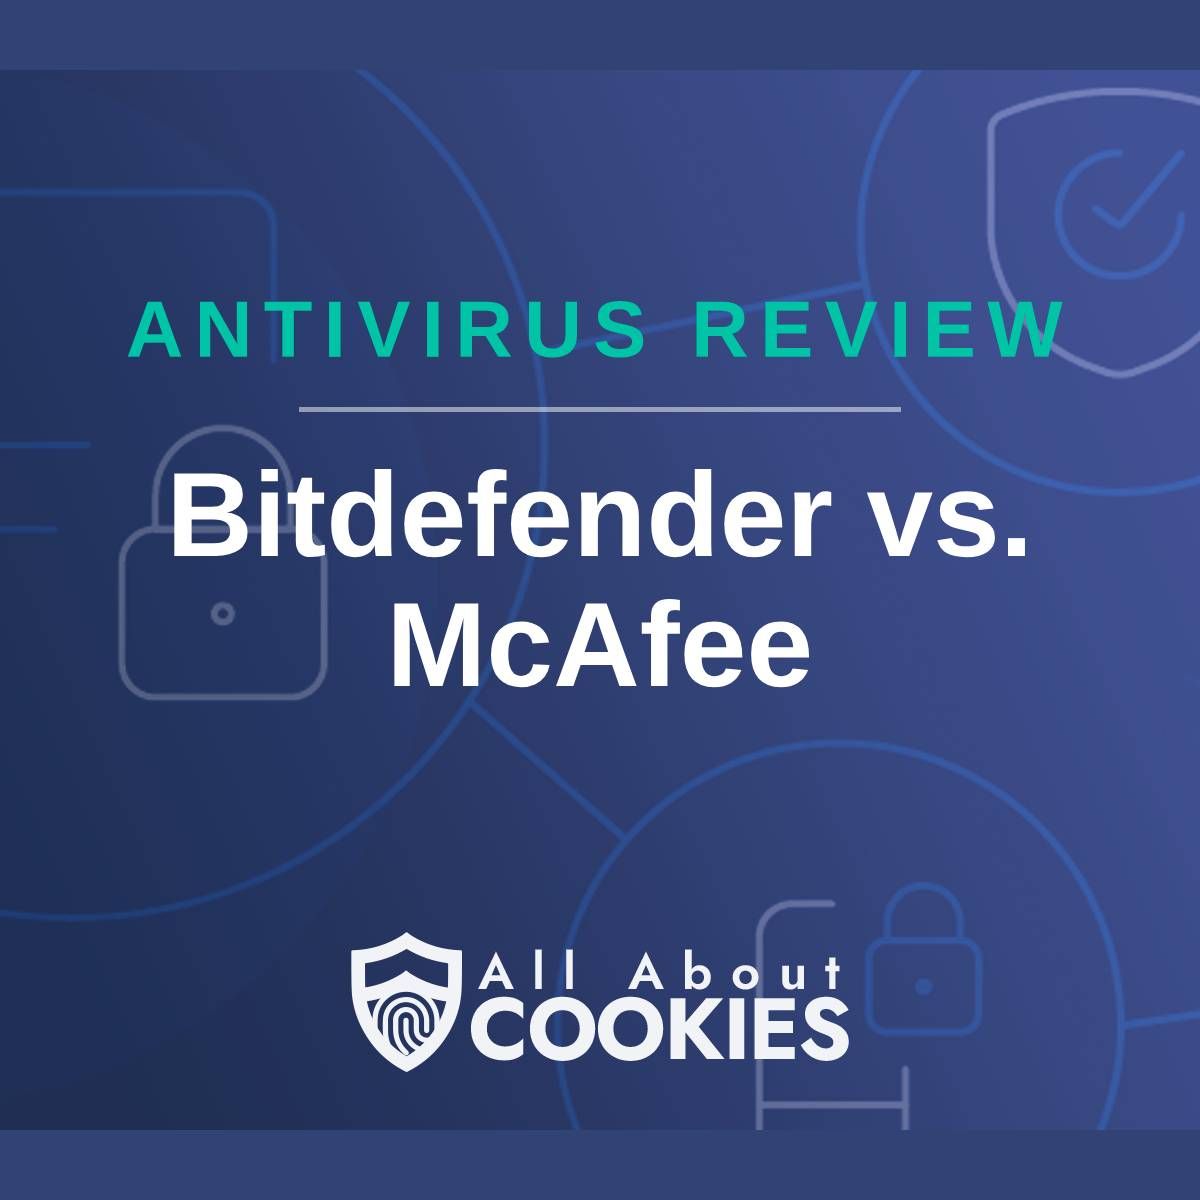 A blue background with images of locks and shields with the text &quot;Antivirus Review Bitdefender vs. McAfee&quot; and the All About Cookies logo. 